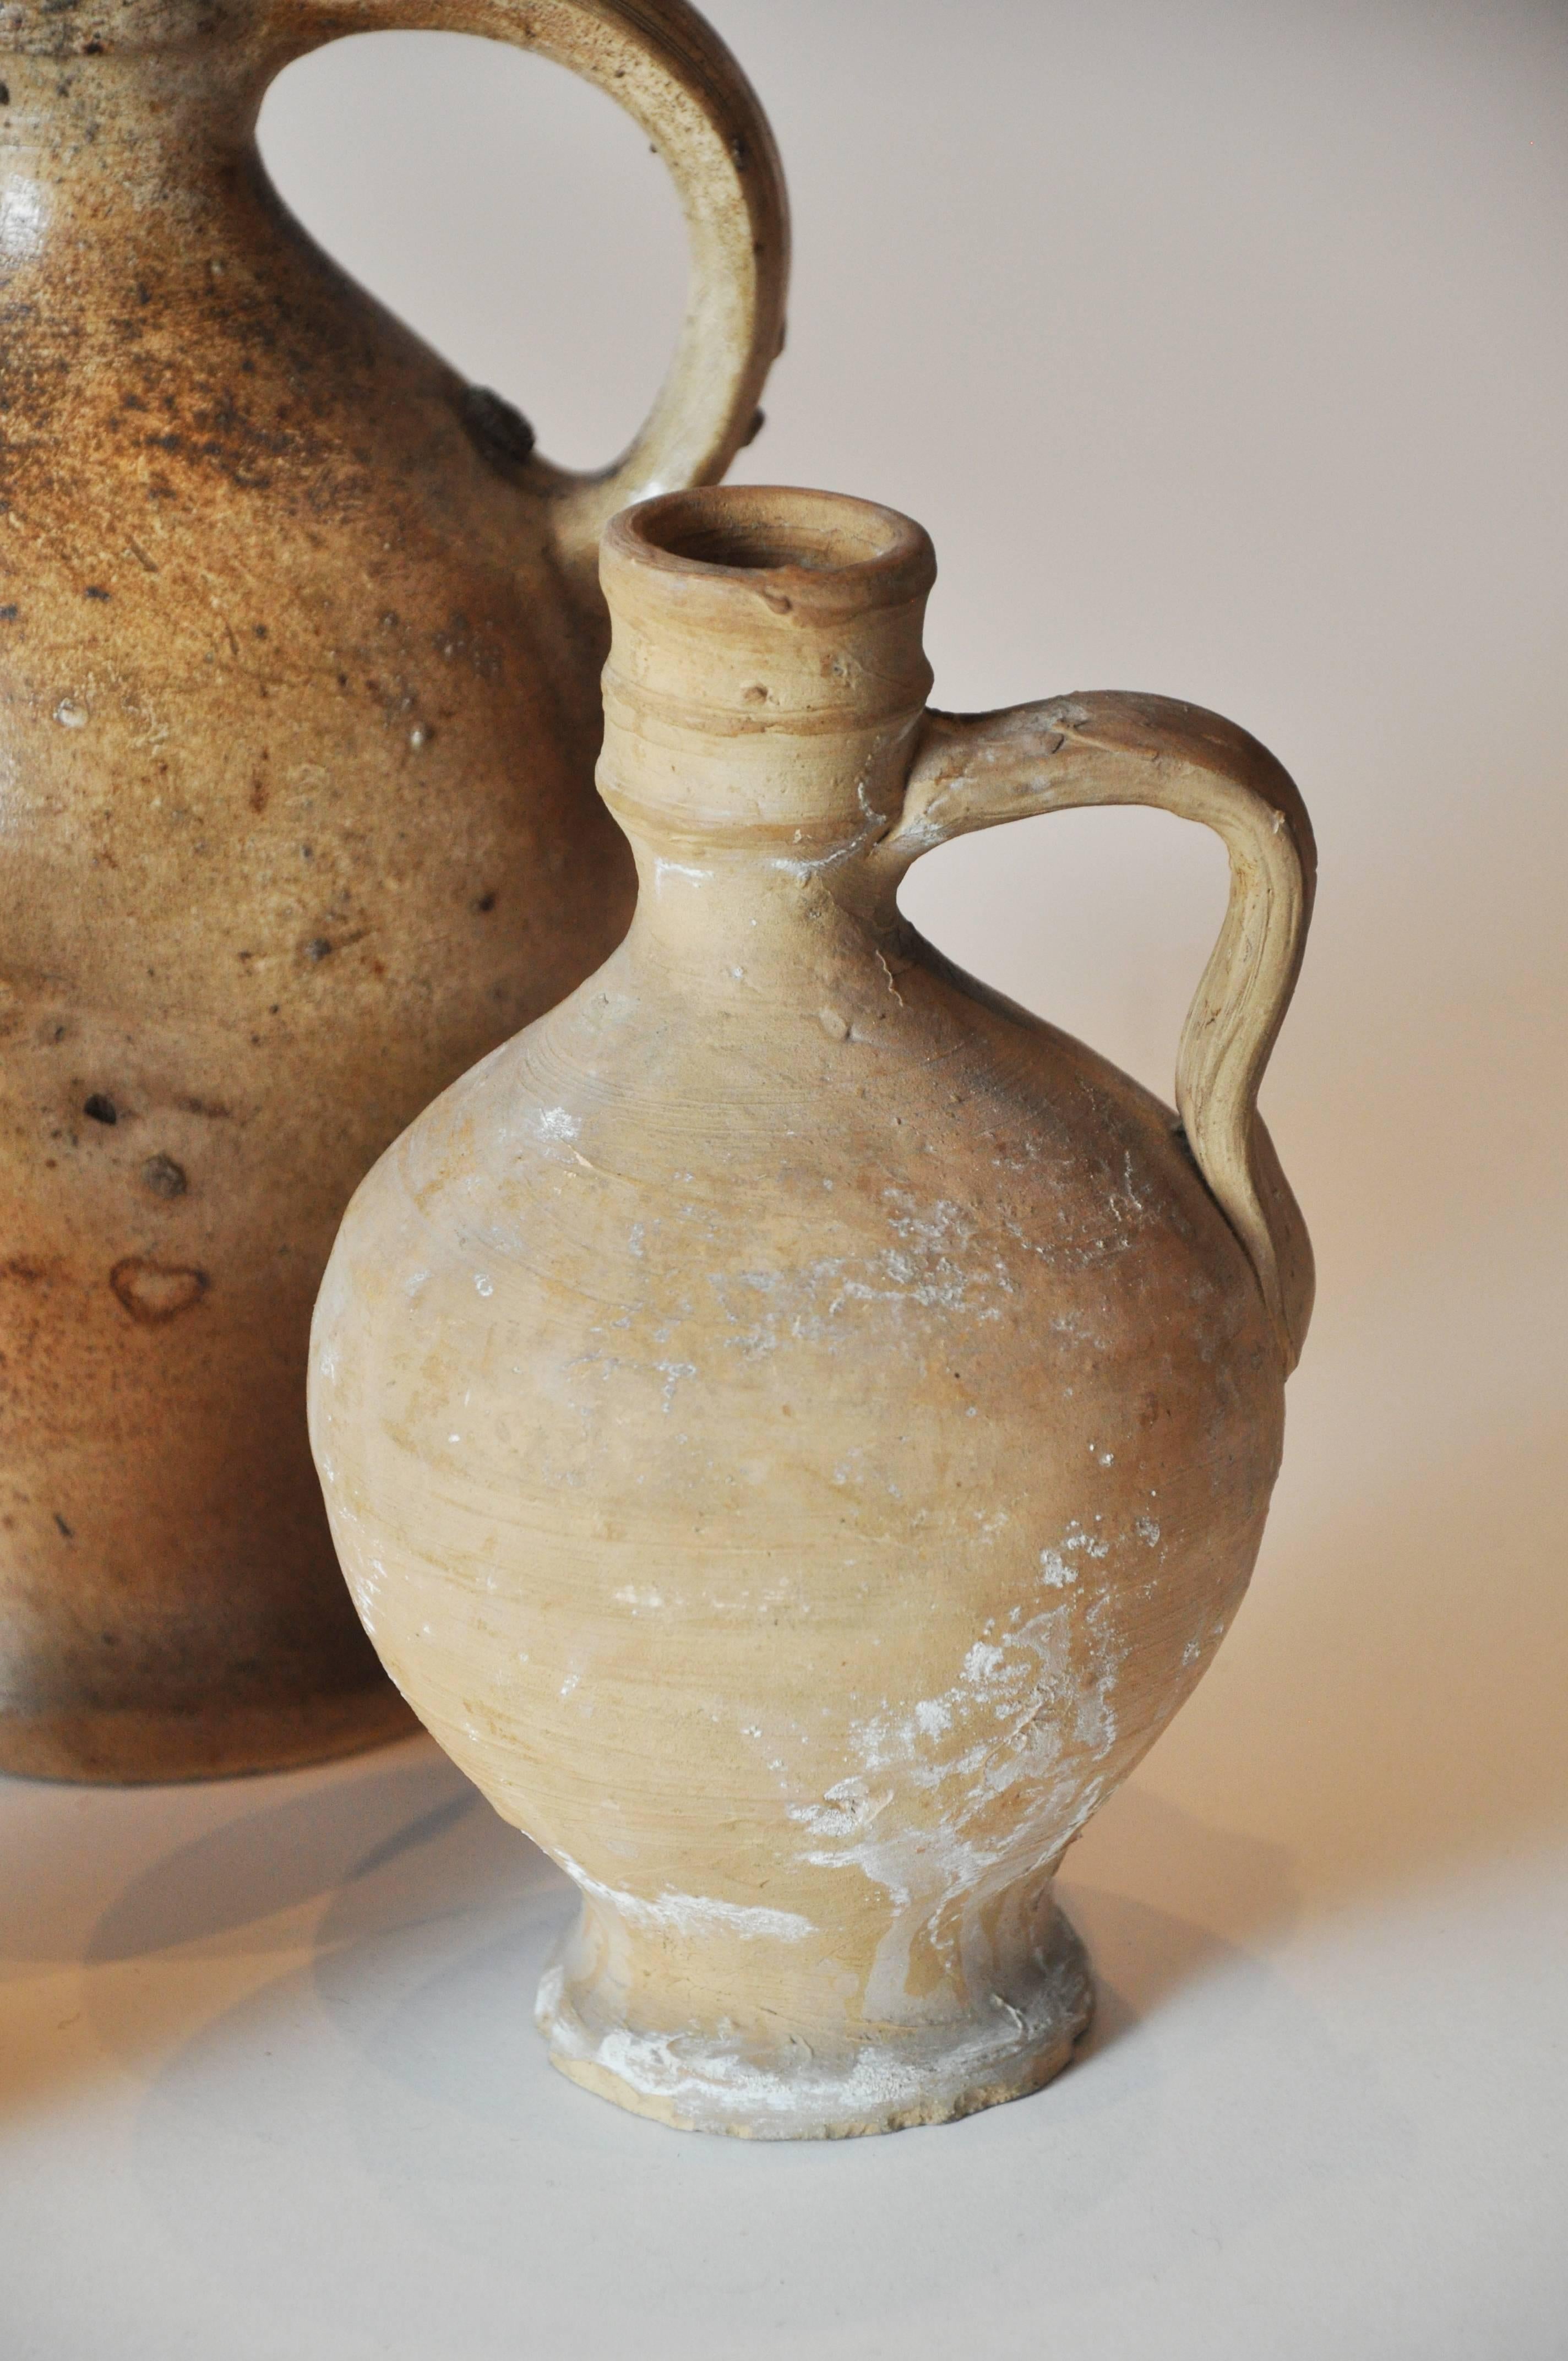 Early 20th century clay pitcher collection from Portugal
Small clay/terra cotta vessel with handle clay pitcher with a repair at the spout
Light brown and beige pitcher with handle, small repair at top
These could be quite old but given I have no